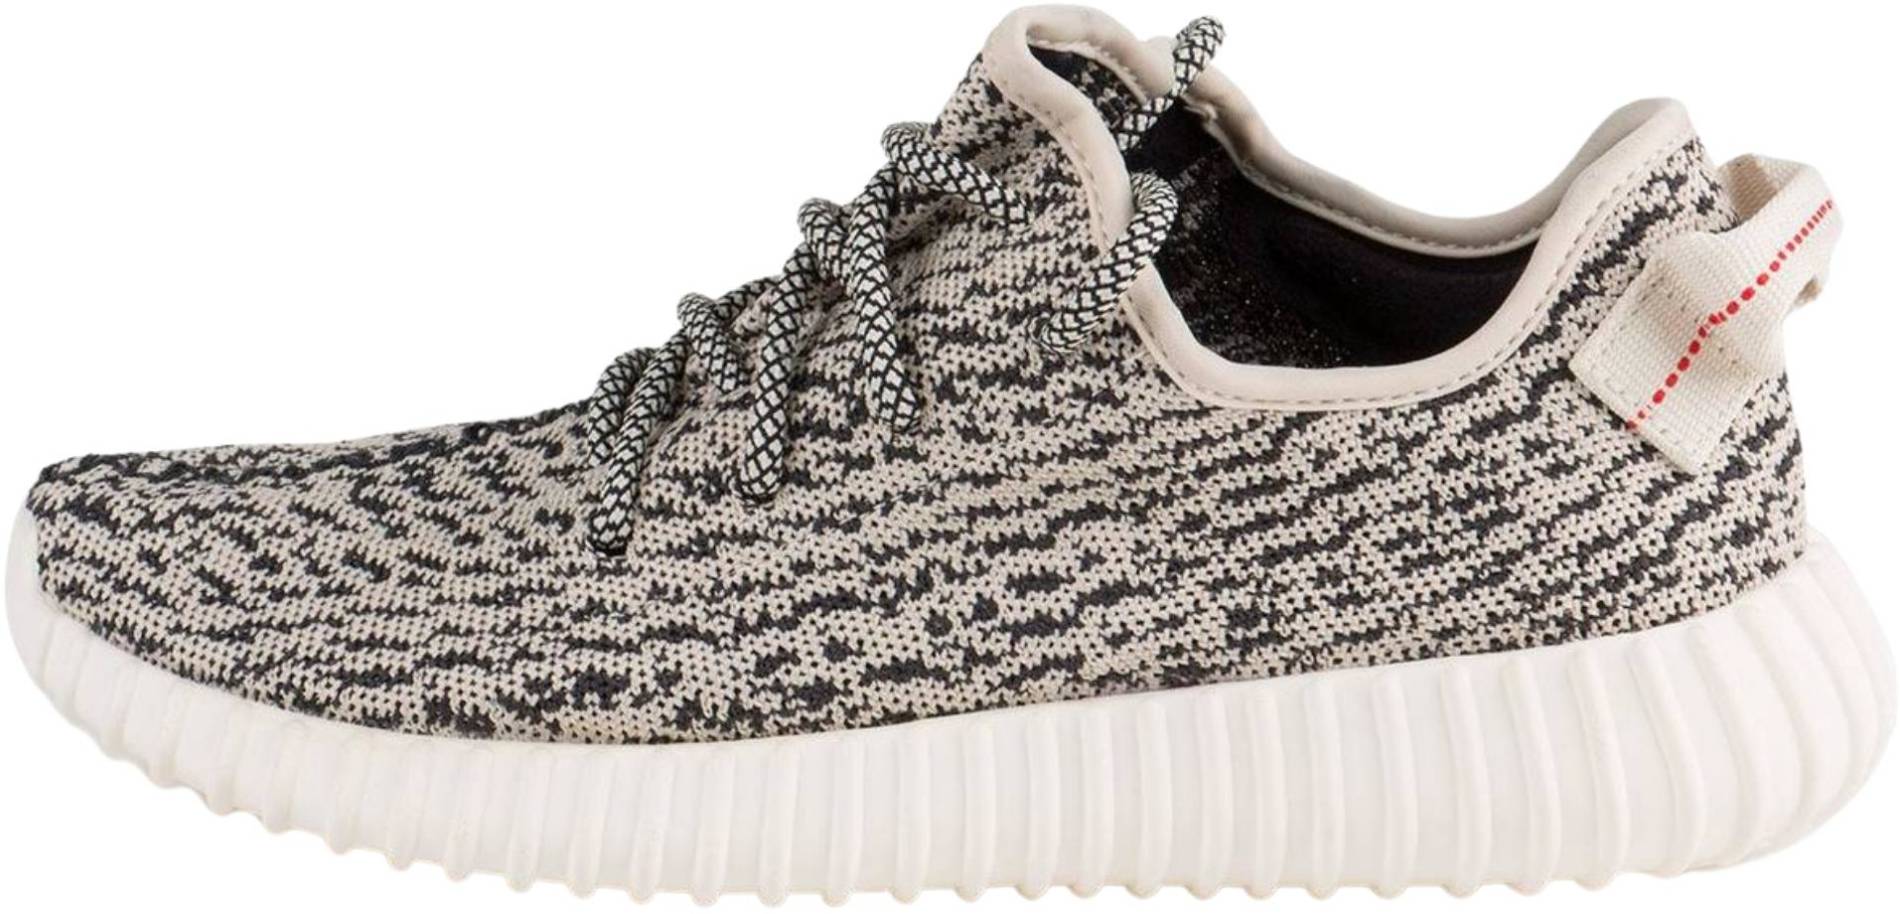 Eyesight I eat breakfast Abstraction Adidas Yeezy 350 Boost sneakers in 4 colors | RunRepeat